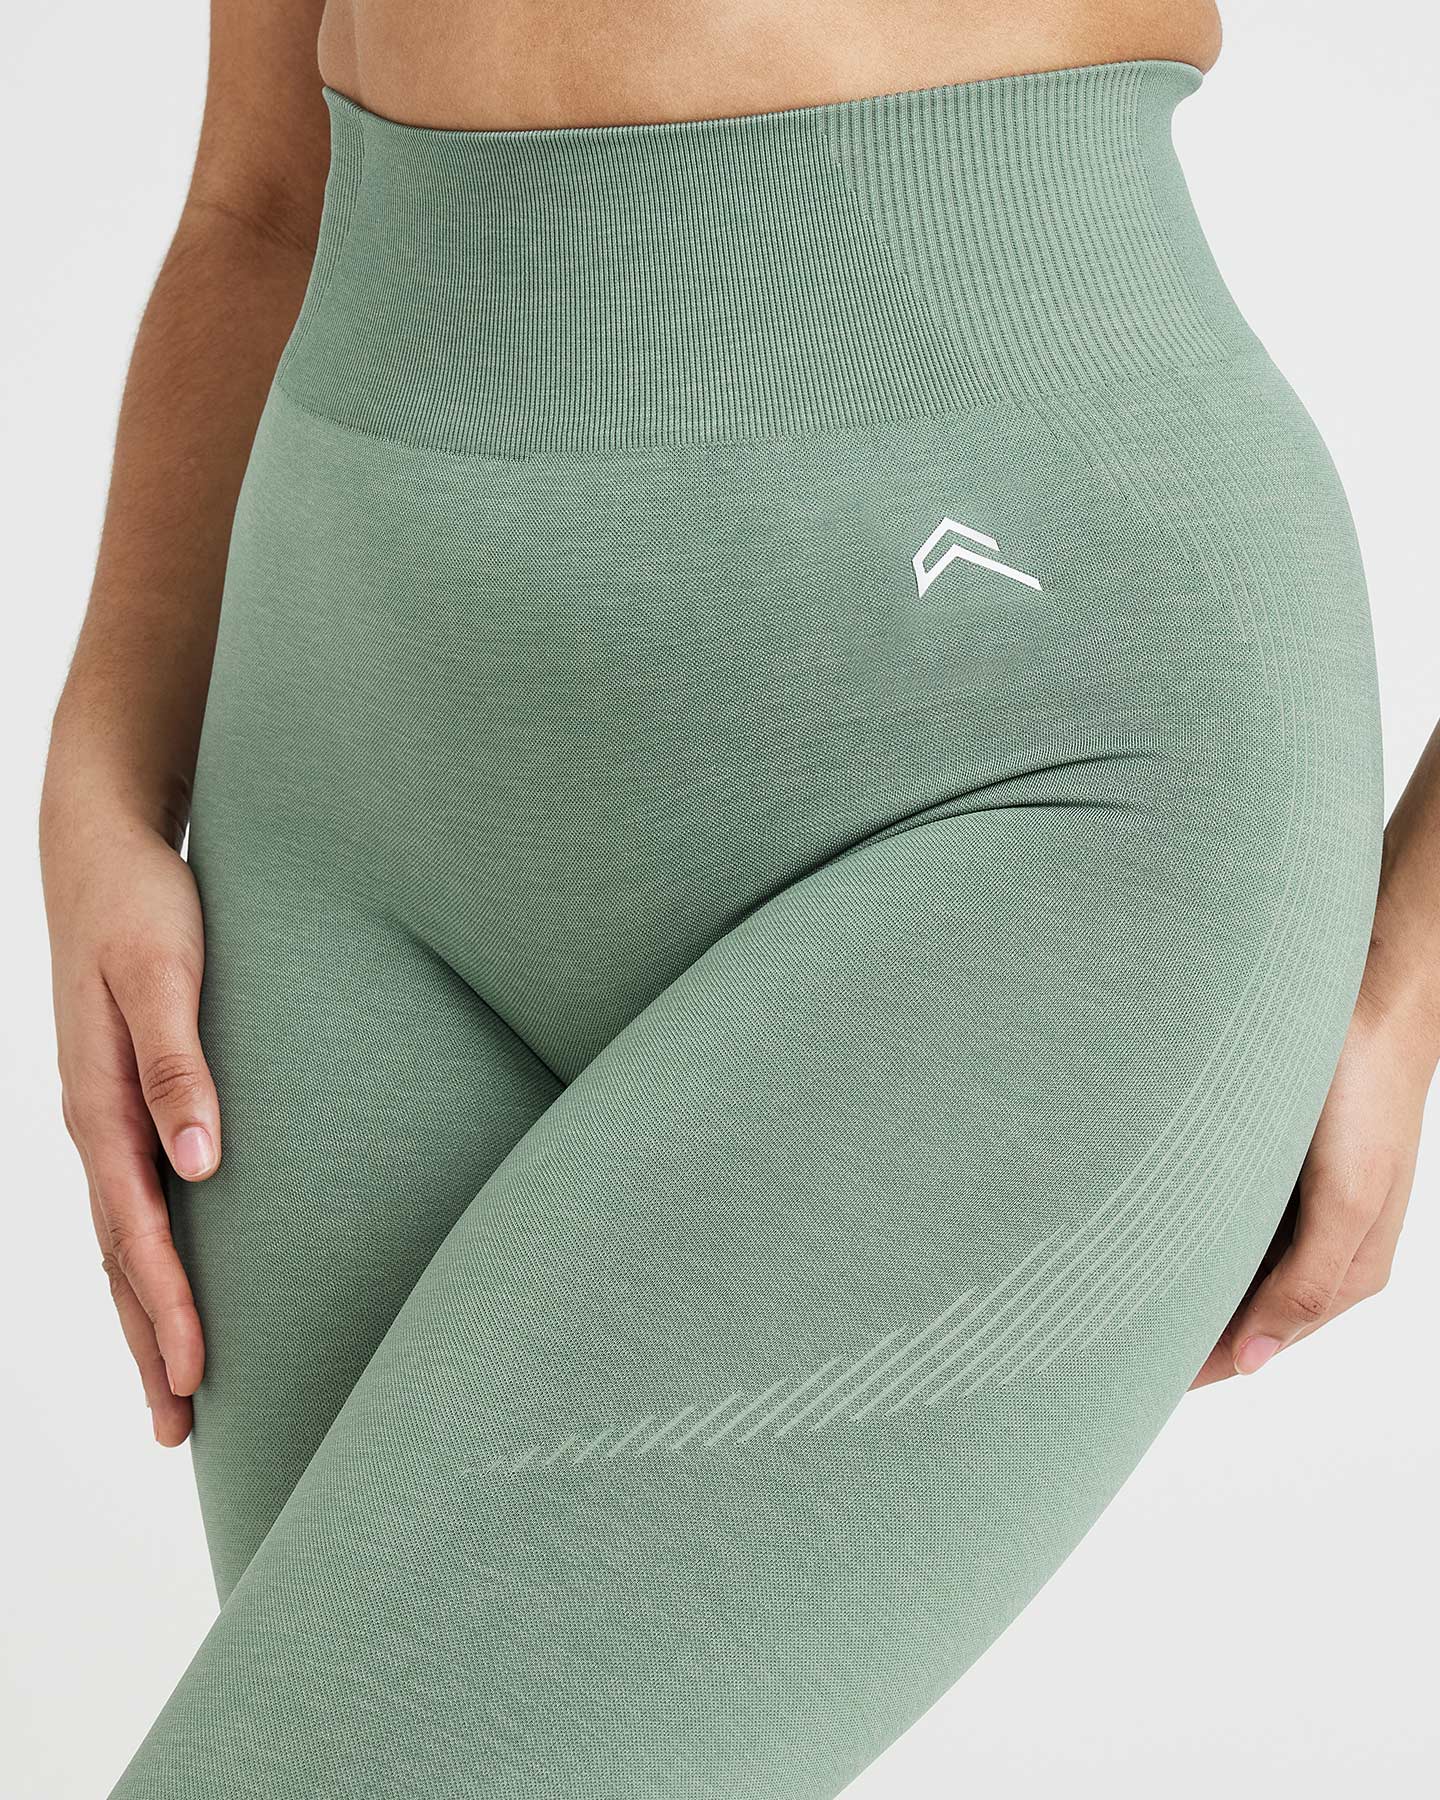 Premium Sage Green Ribbed Leggings, Unscripted